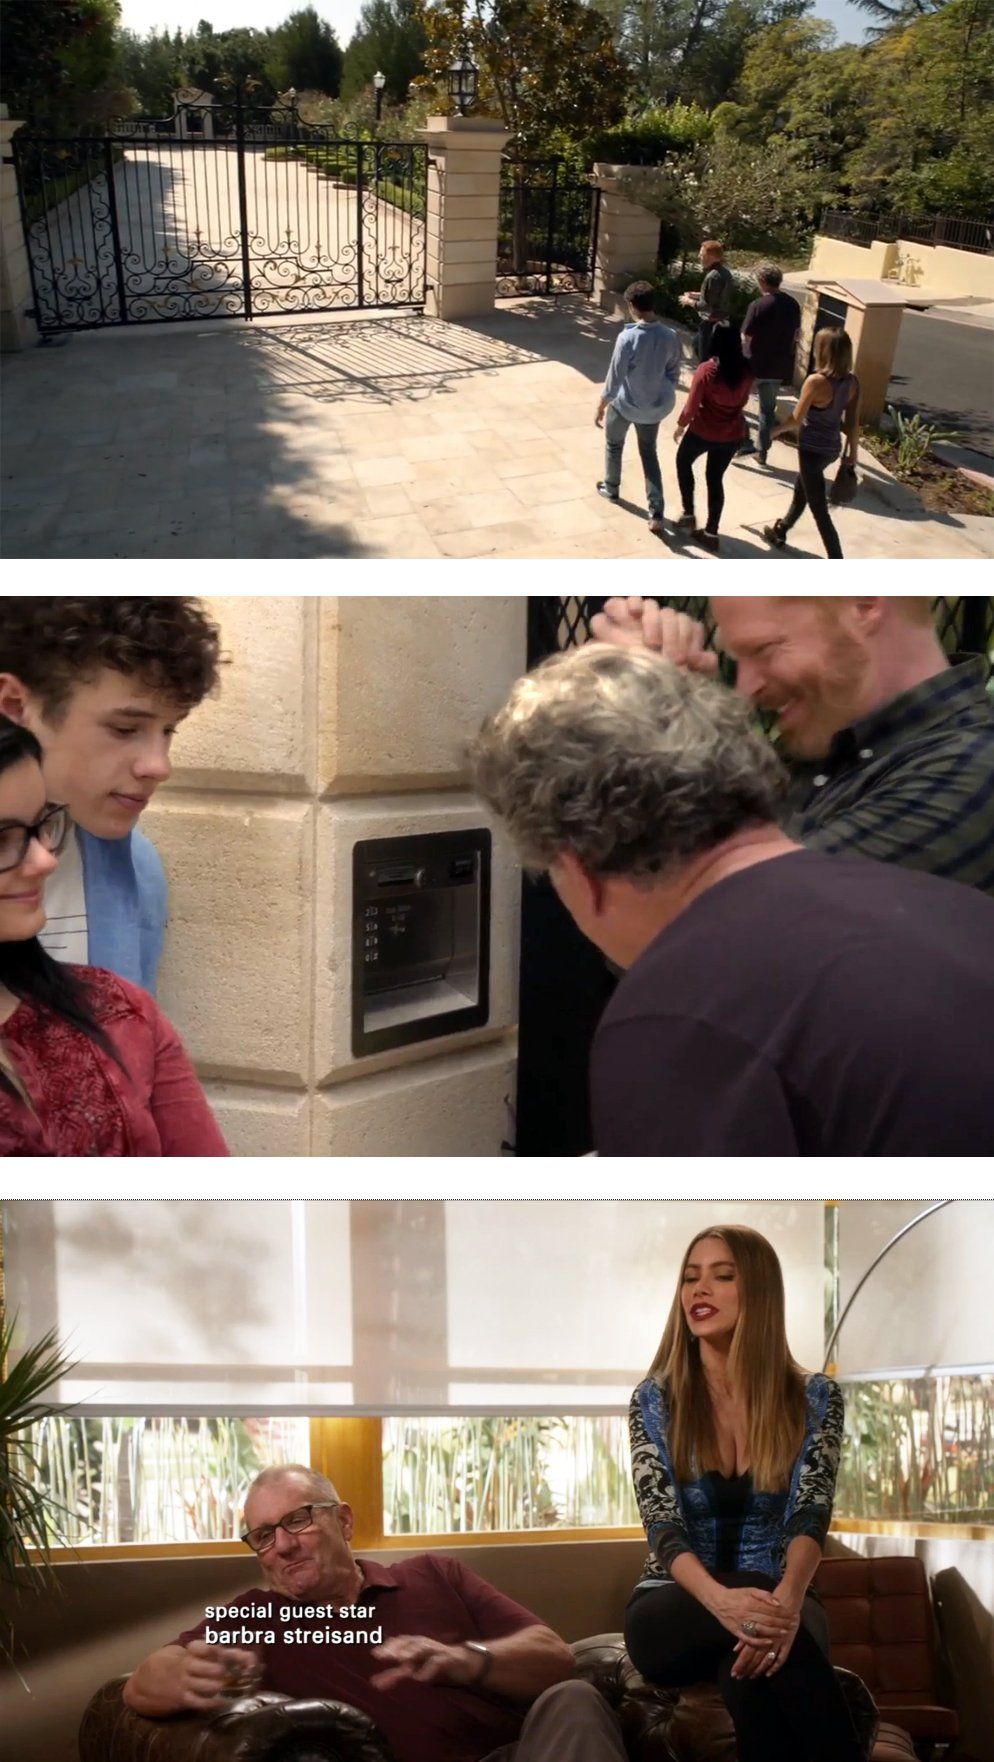 Scenes from Modern Family 2016 episode with Barbra Streisand voice cameo.